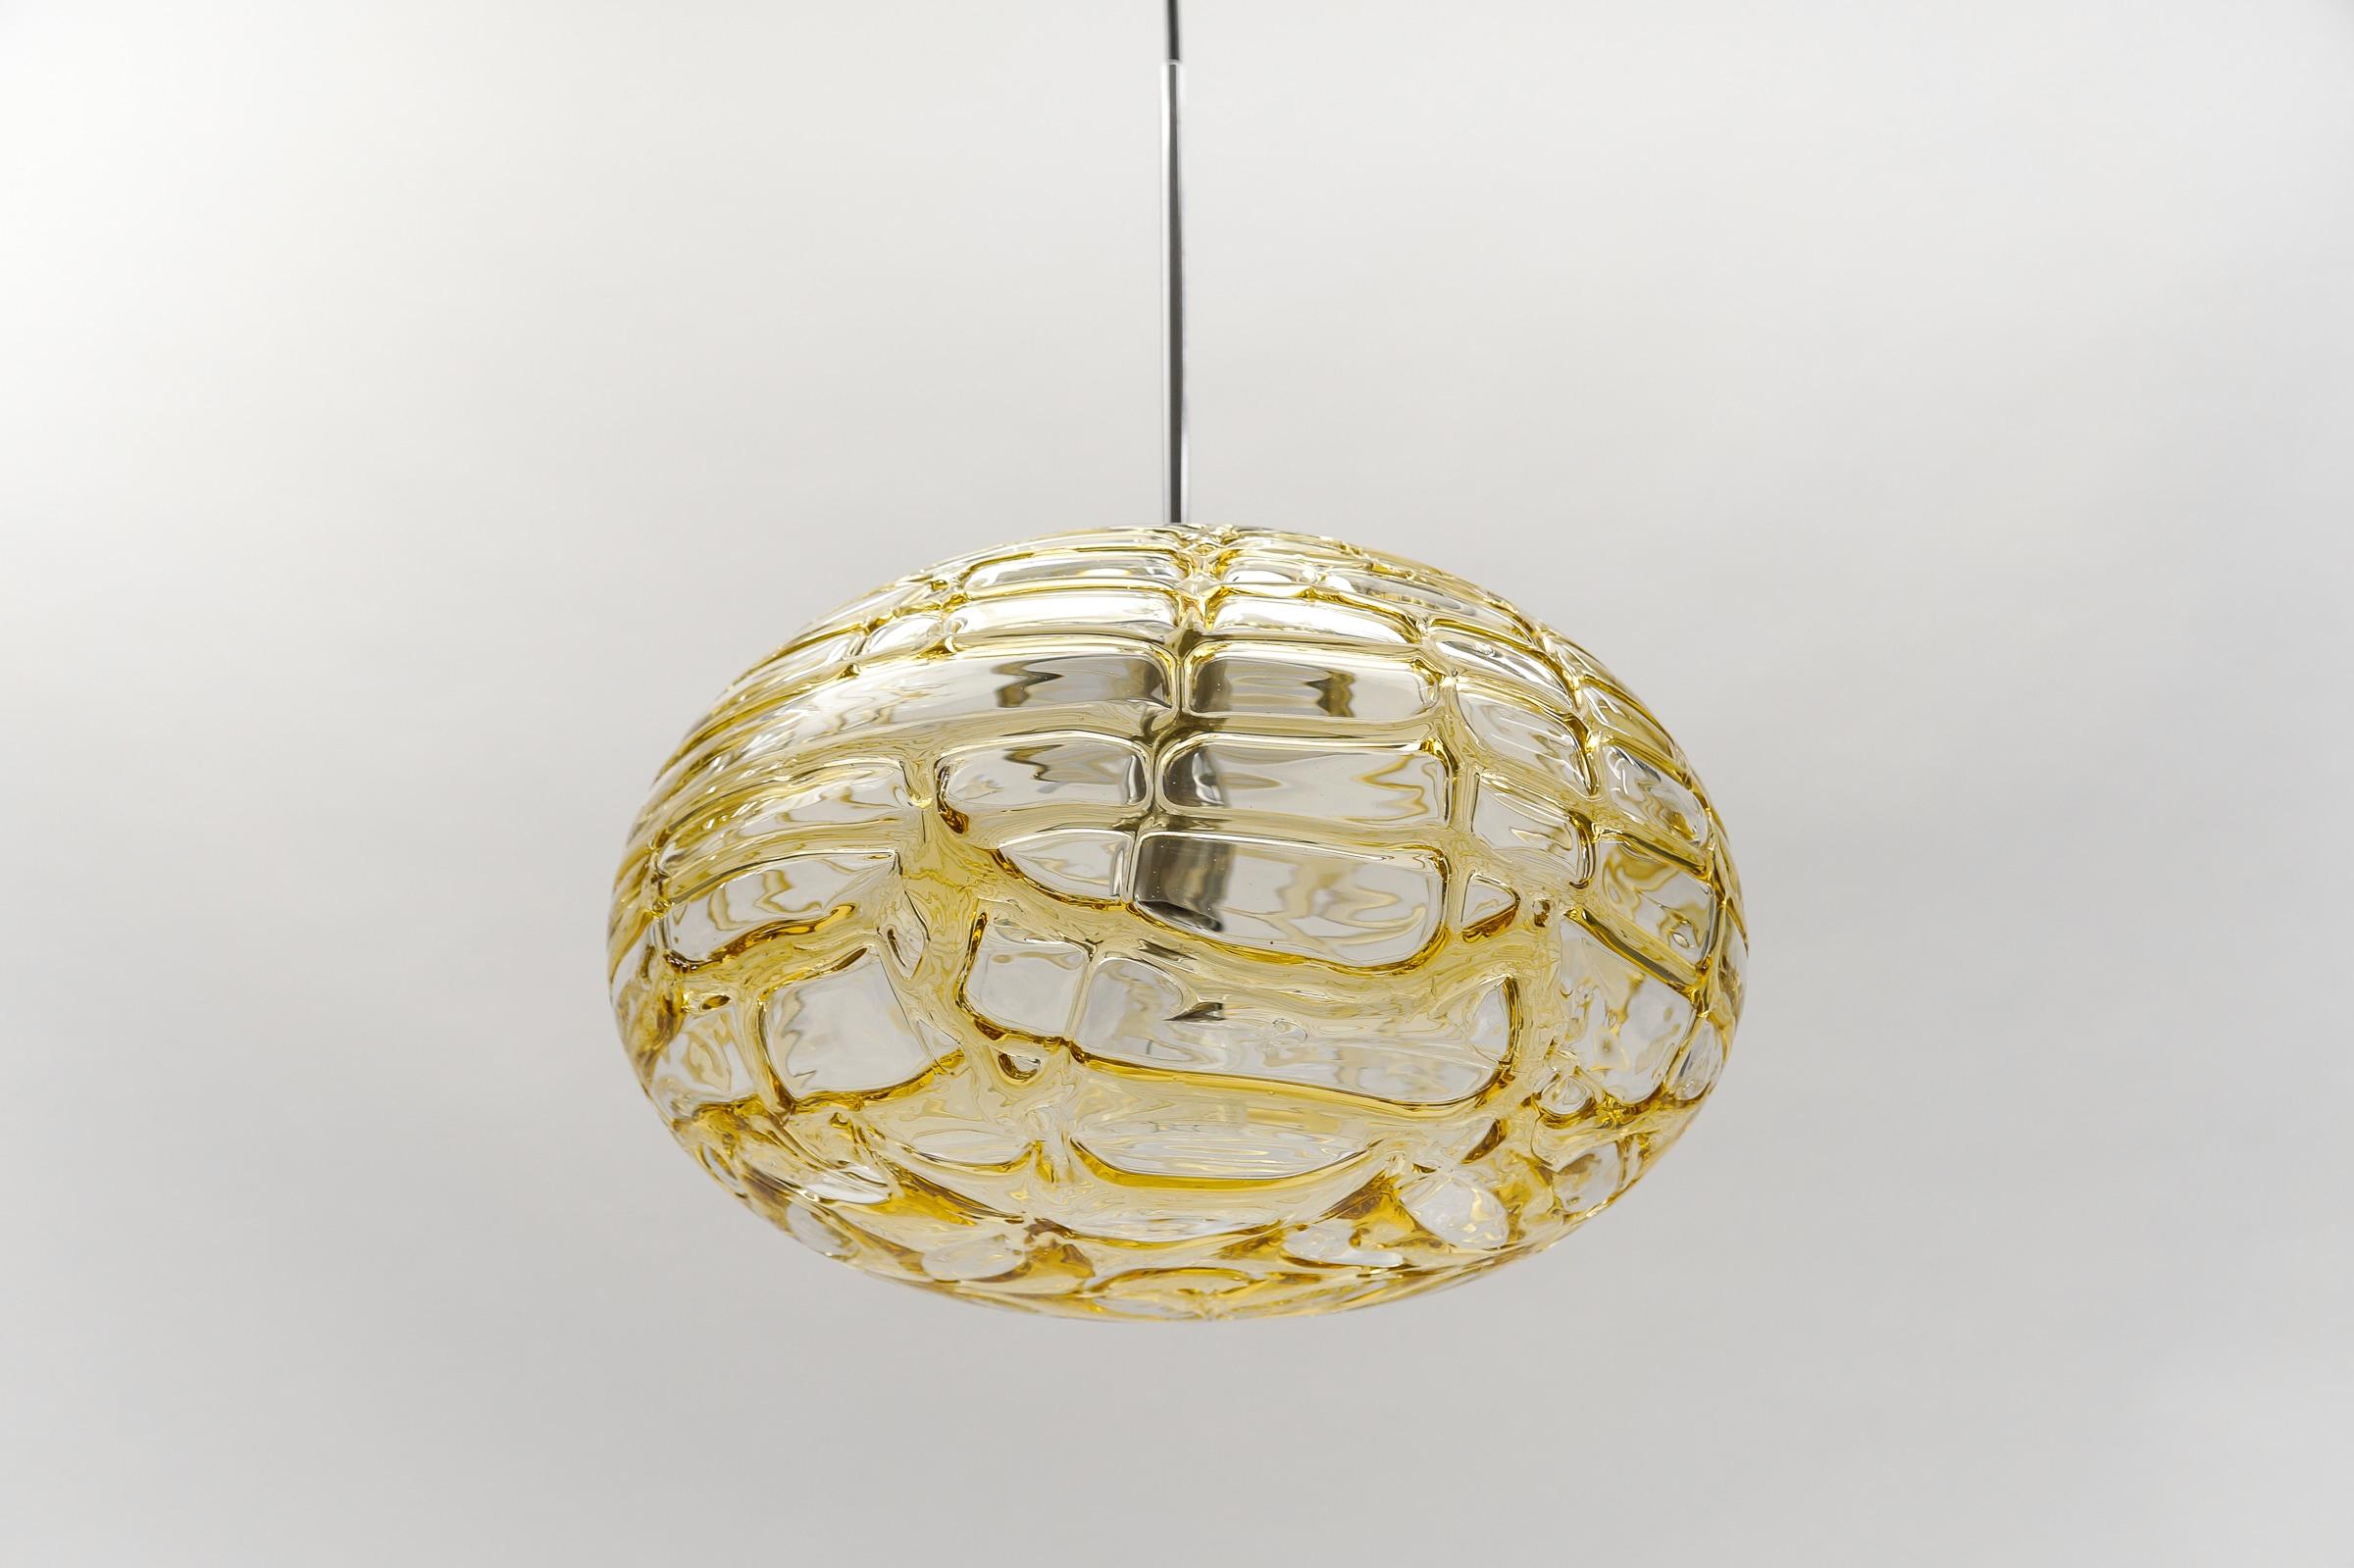 Yellow Oval Murano Glass Ball Pendant Lamp by Doria, 1960s Germany   For Sale 2